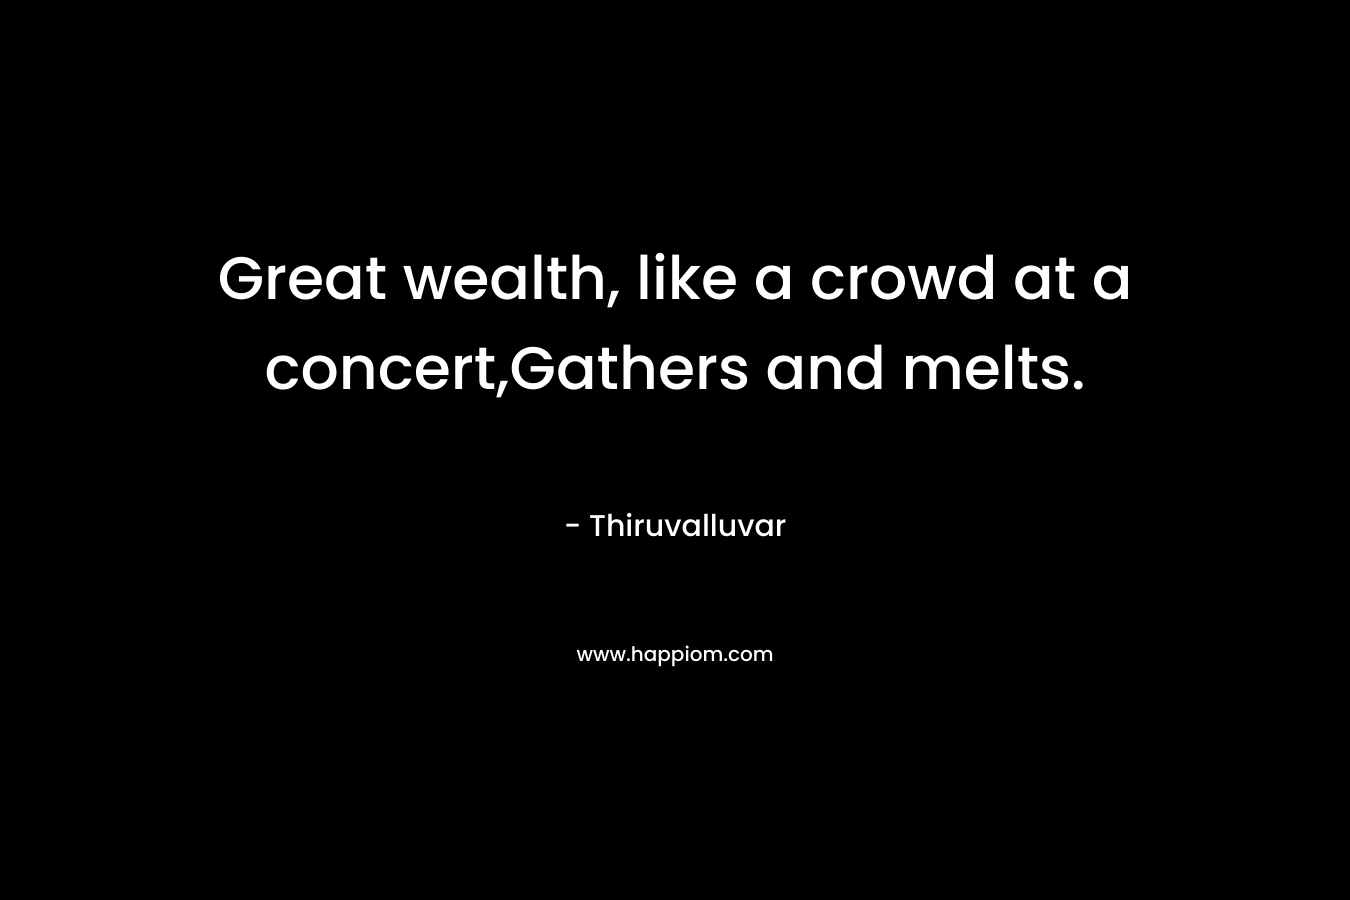 Great wealth, like a crowd at a concert,Gathers and melts.